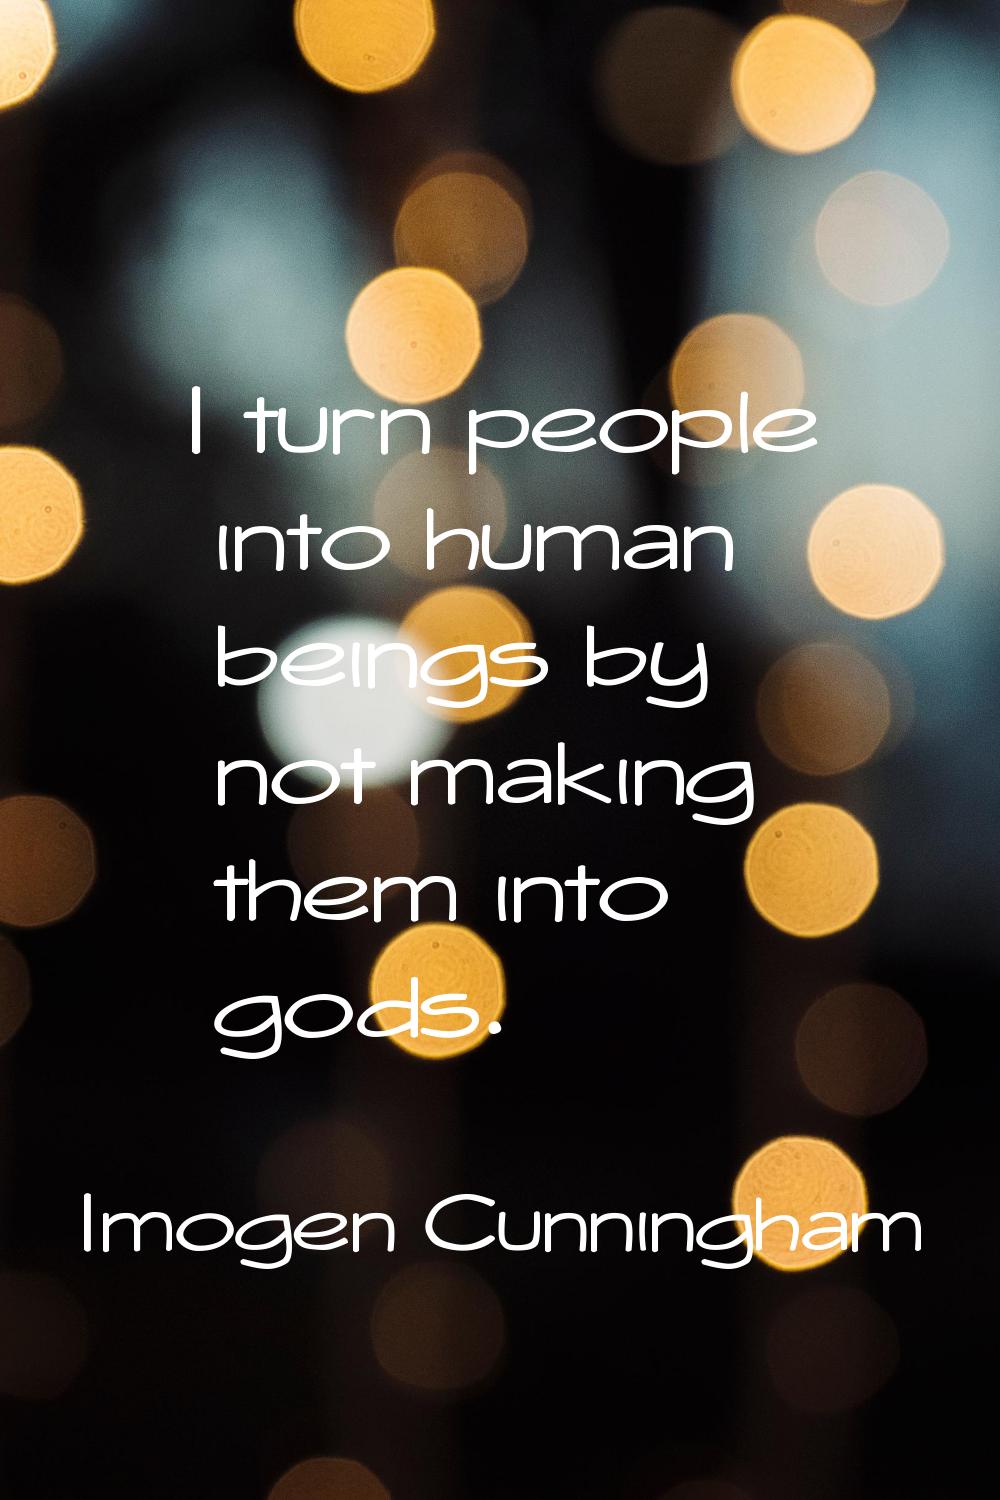 I turn people into human beings by not making them into gods.